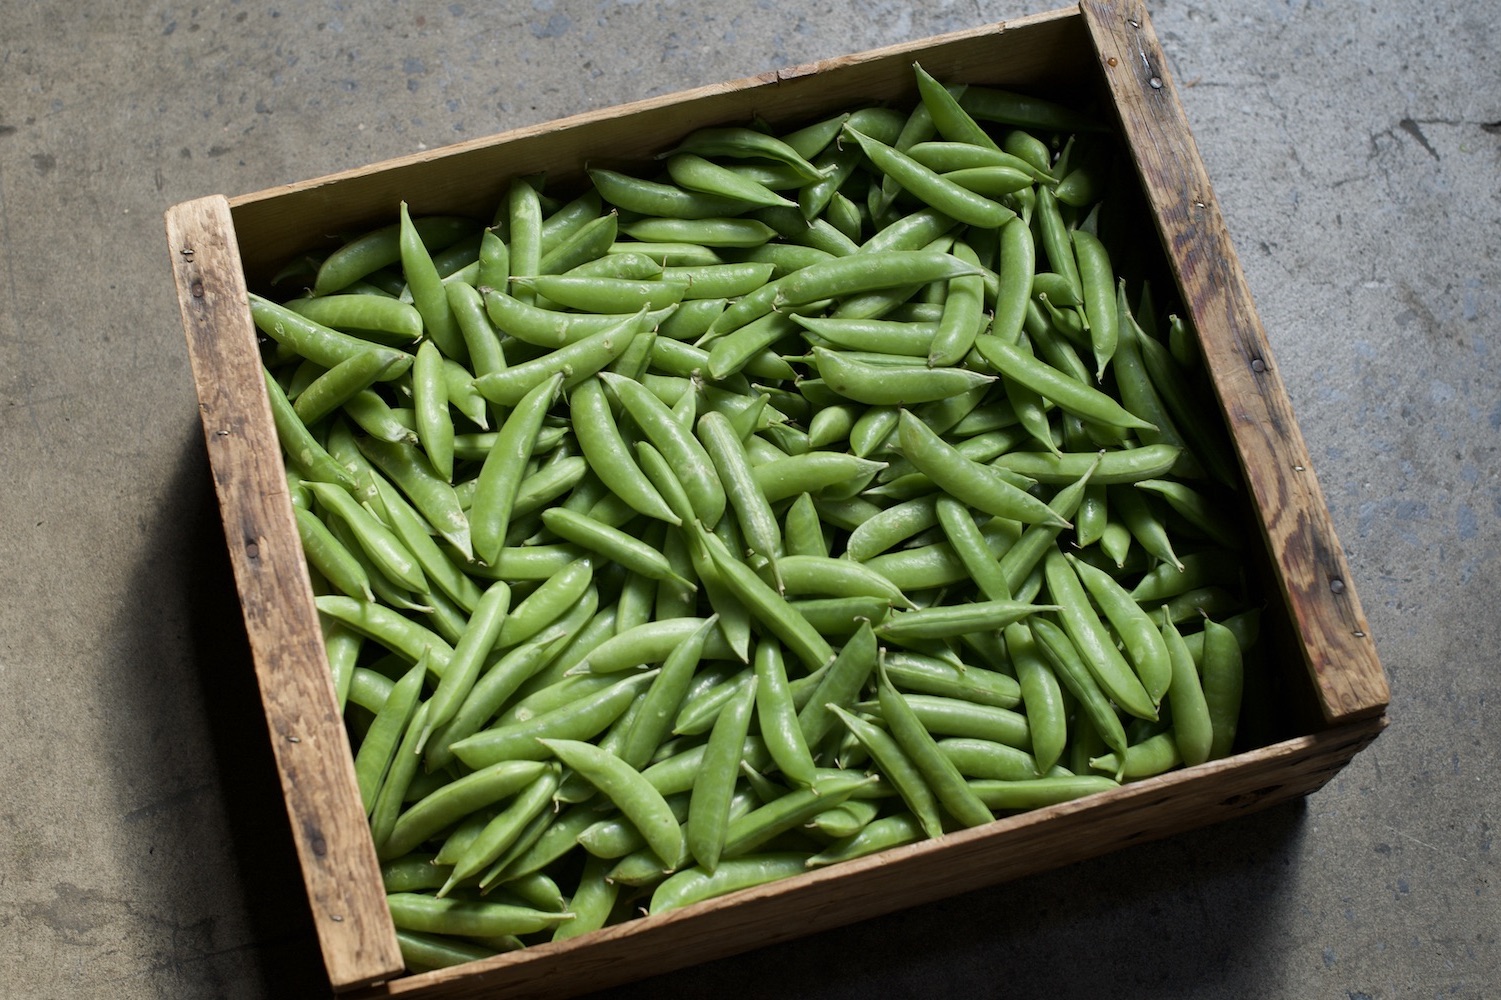 a wooden box of snap peas on a concrete floor